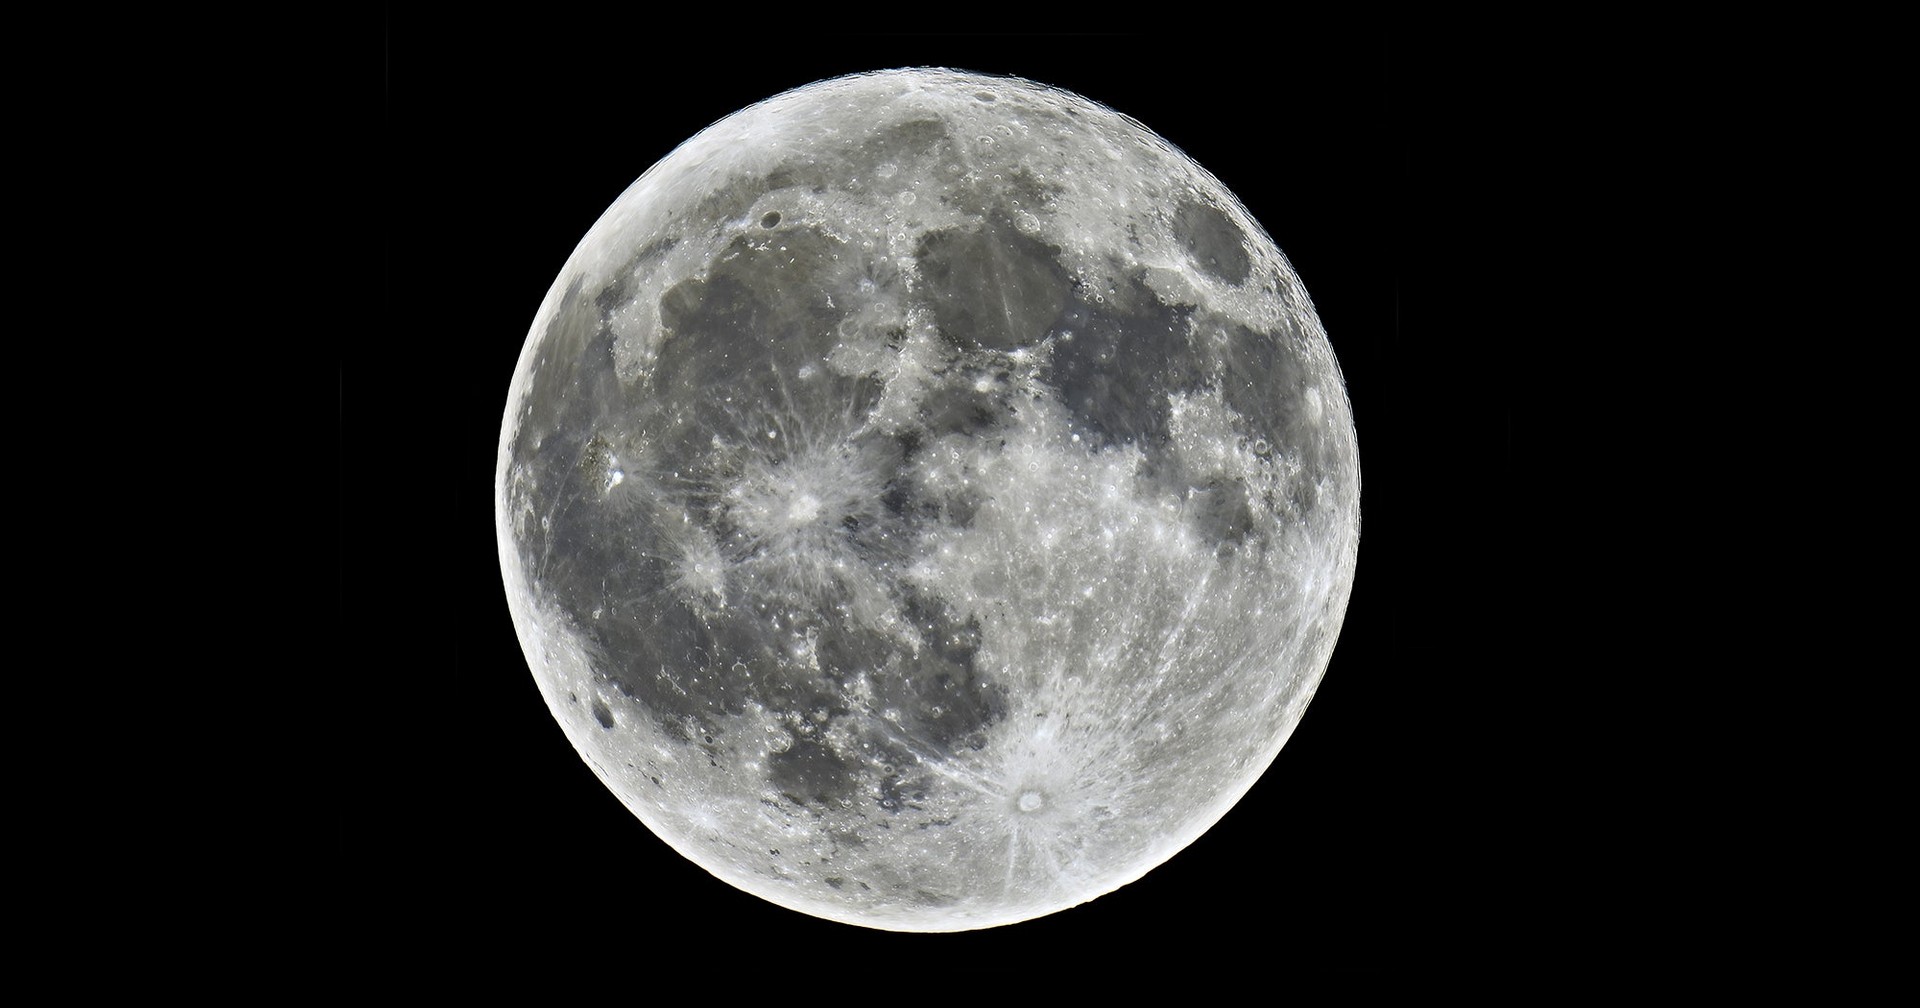 Watch the very high resolution image of the moon, which took 45 minutes